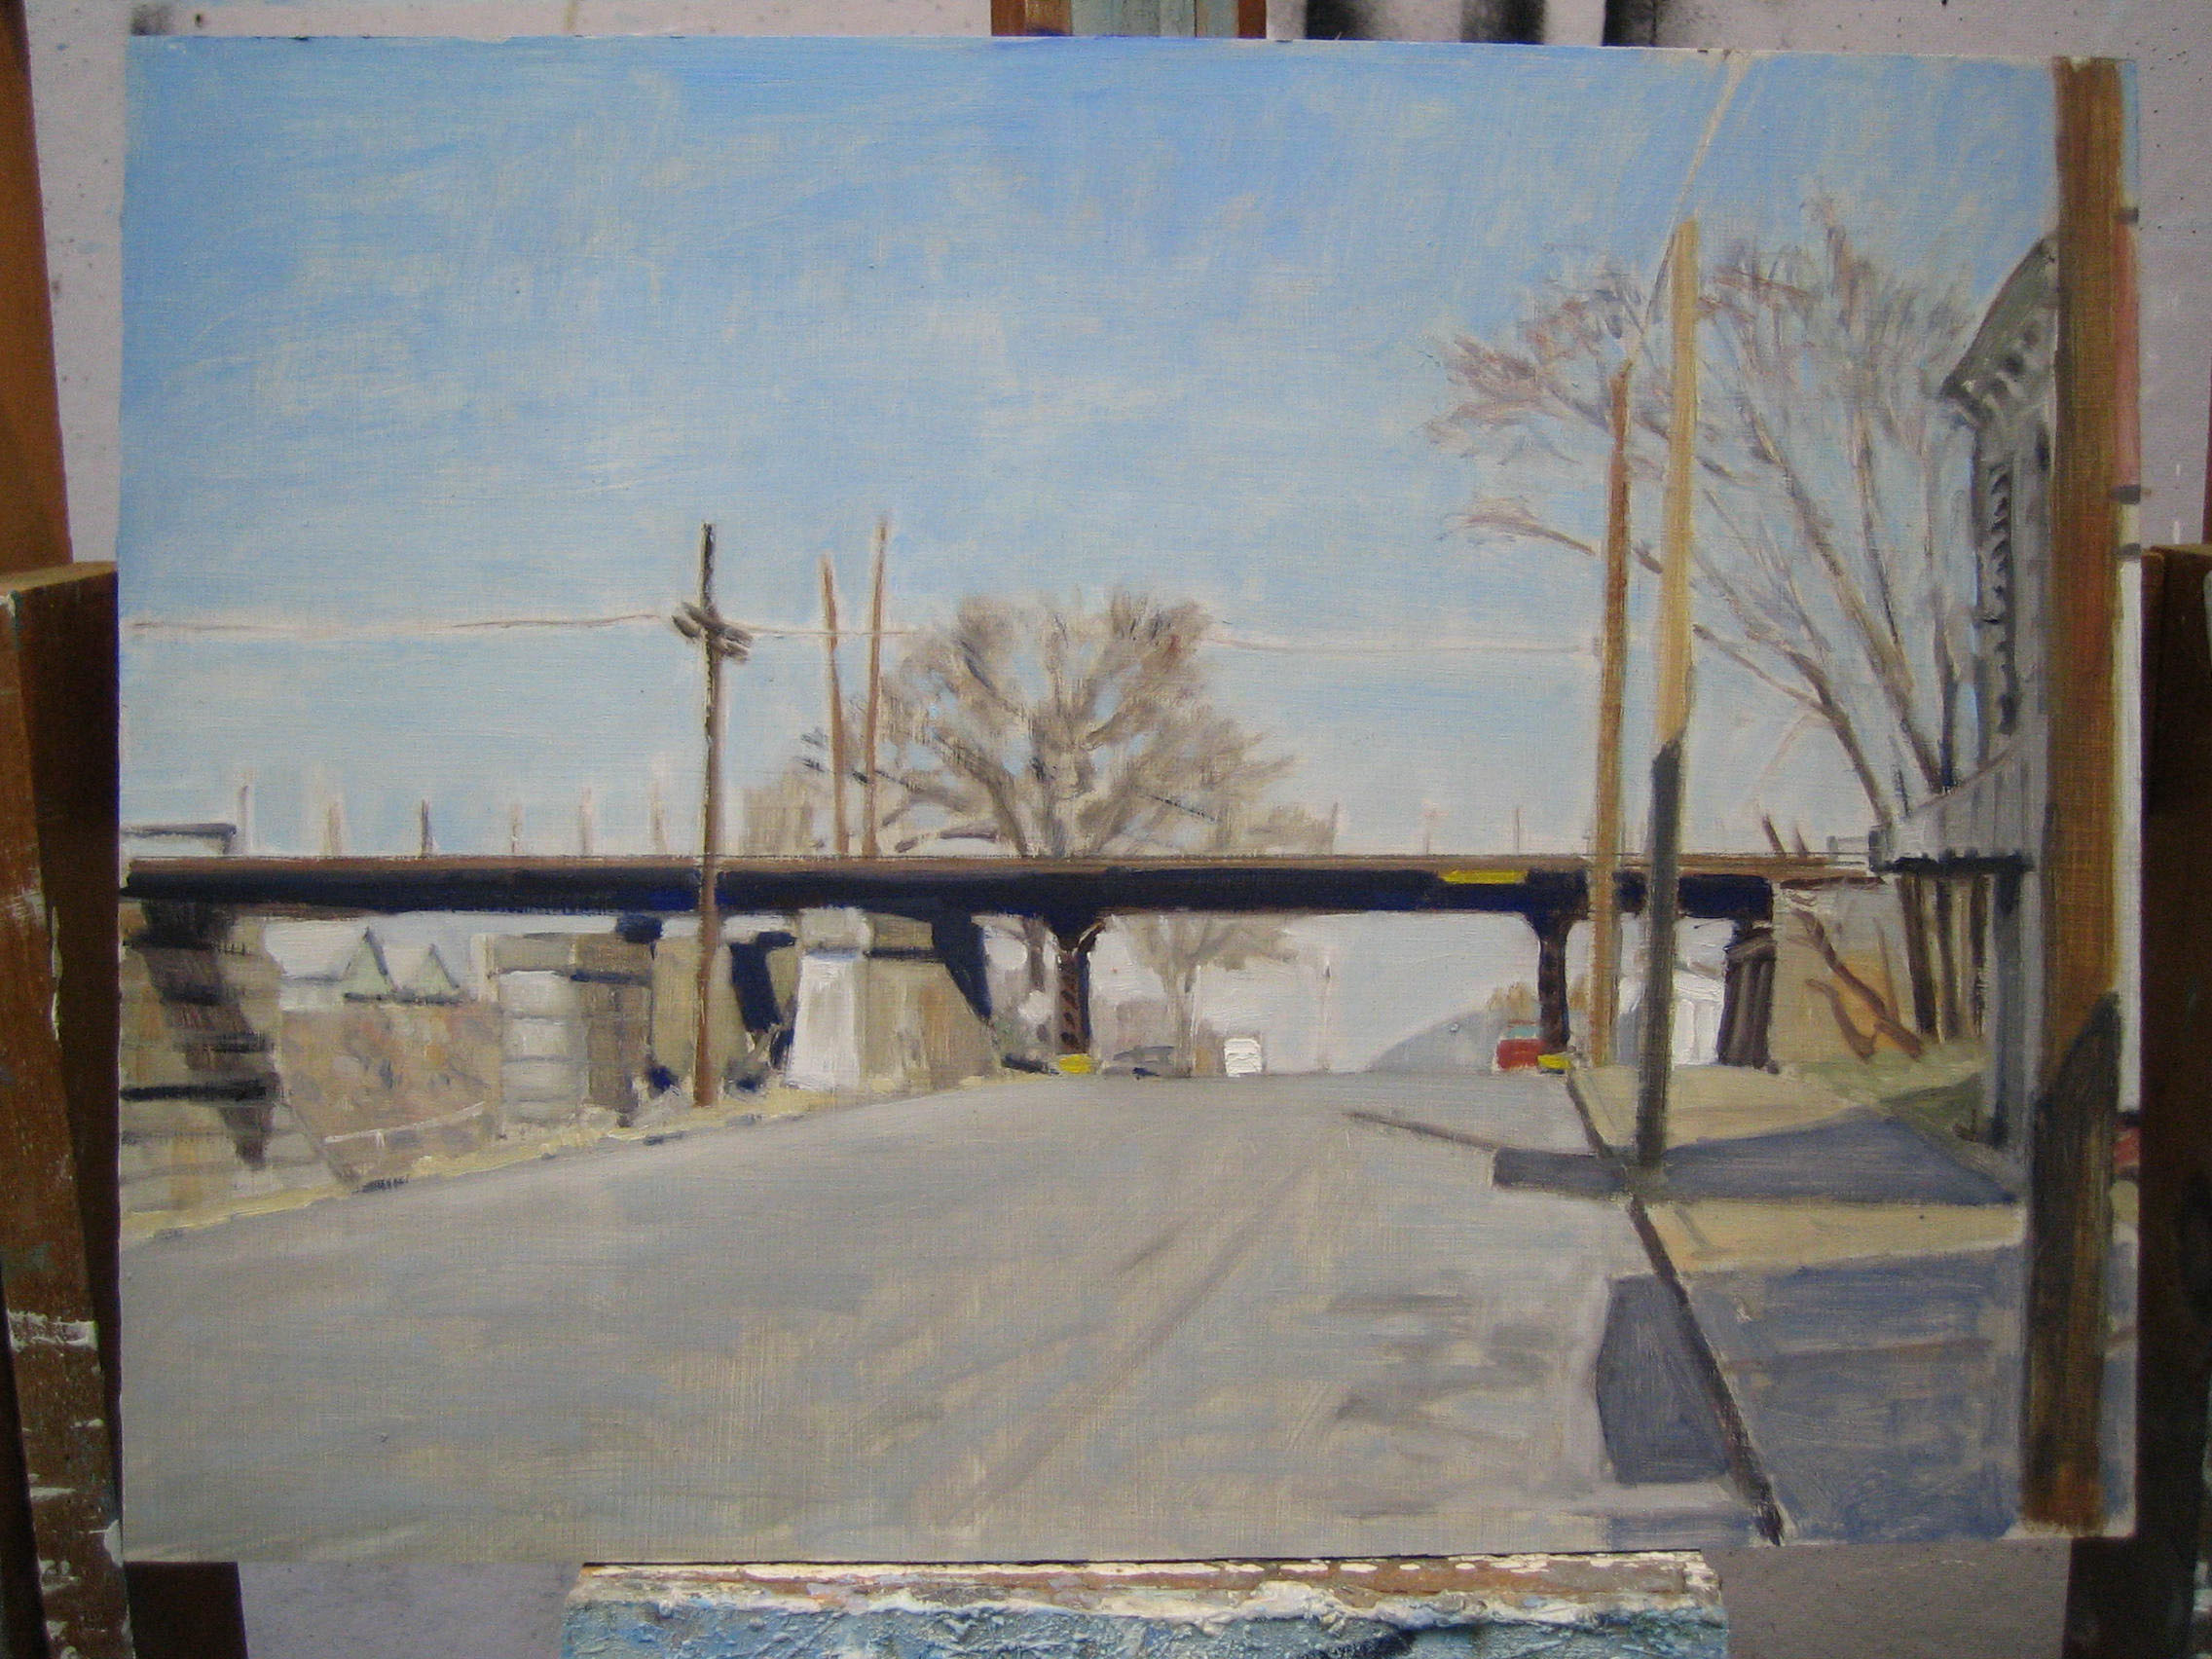 Painting of a train trestlel over a road